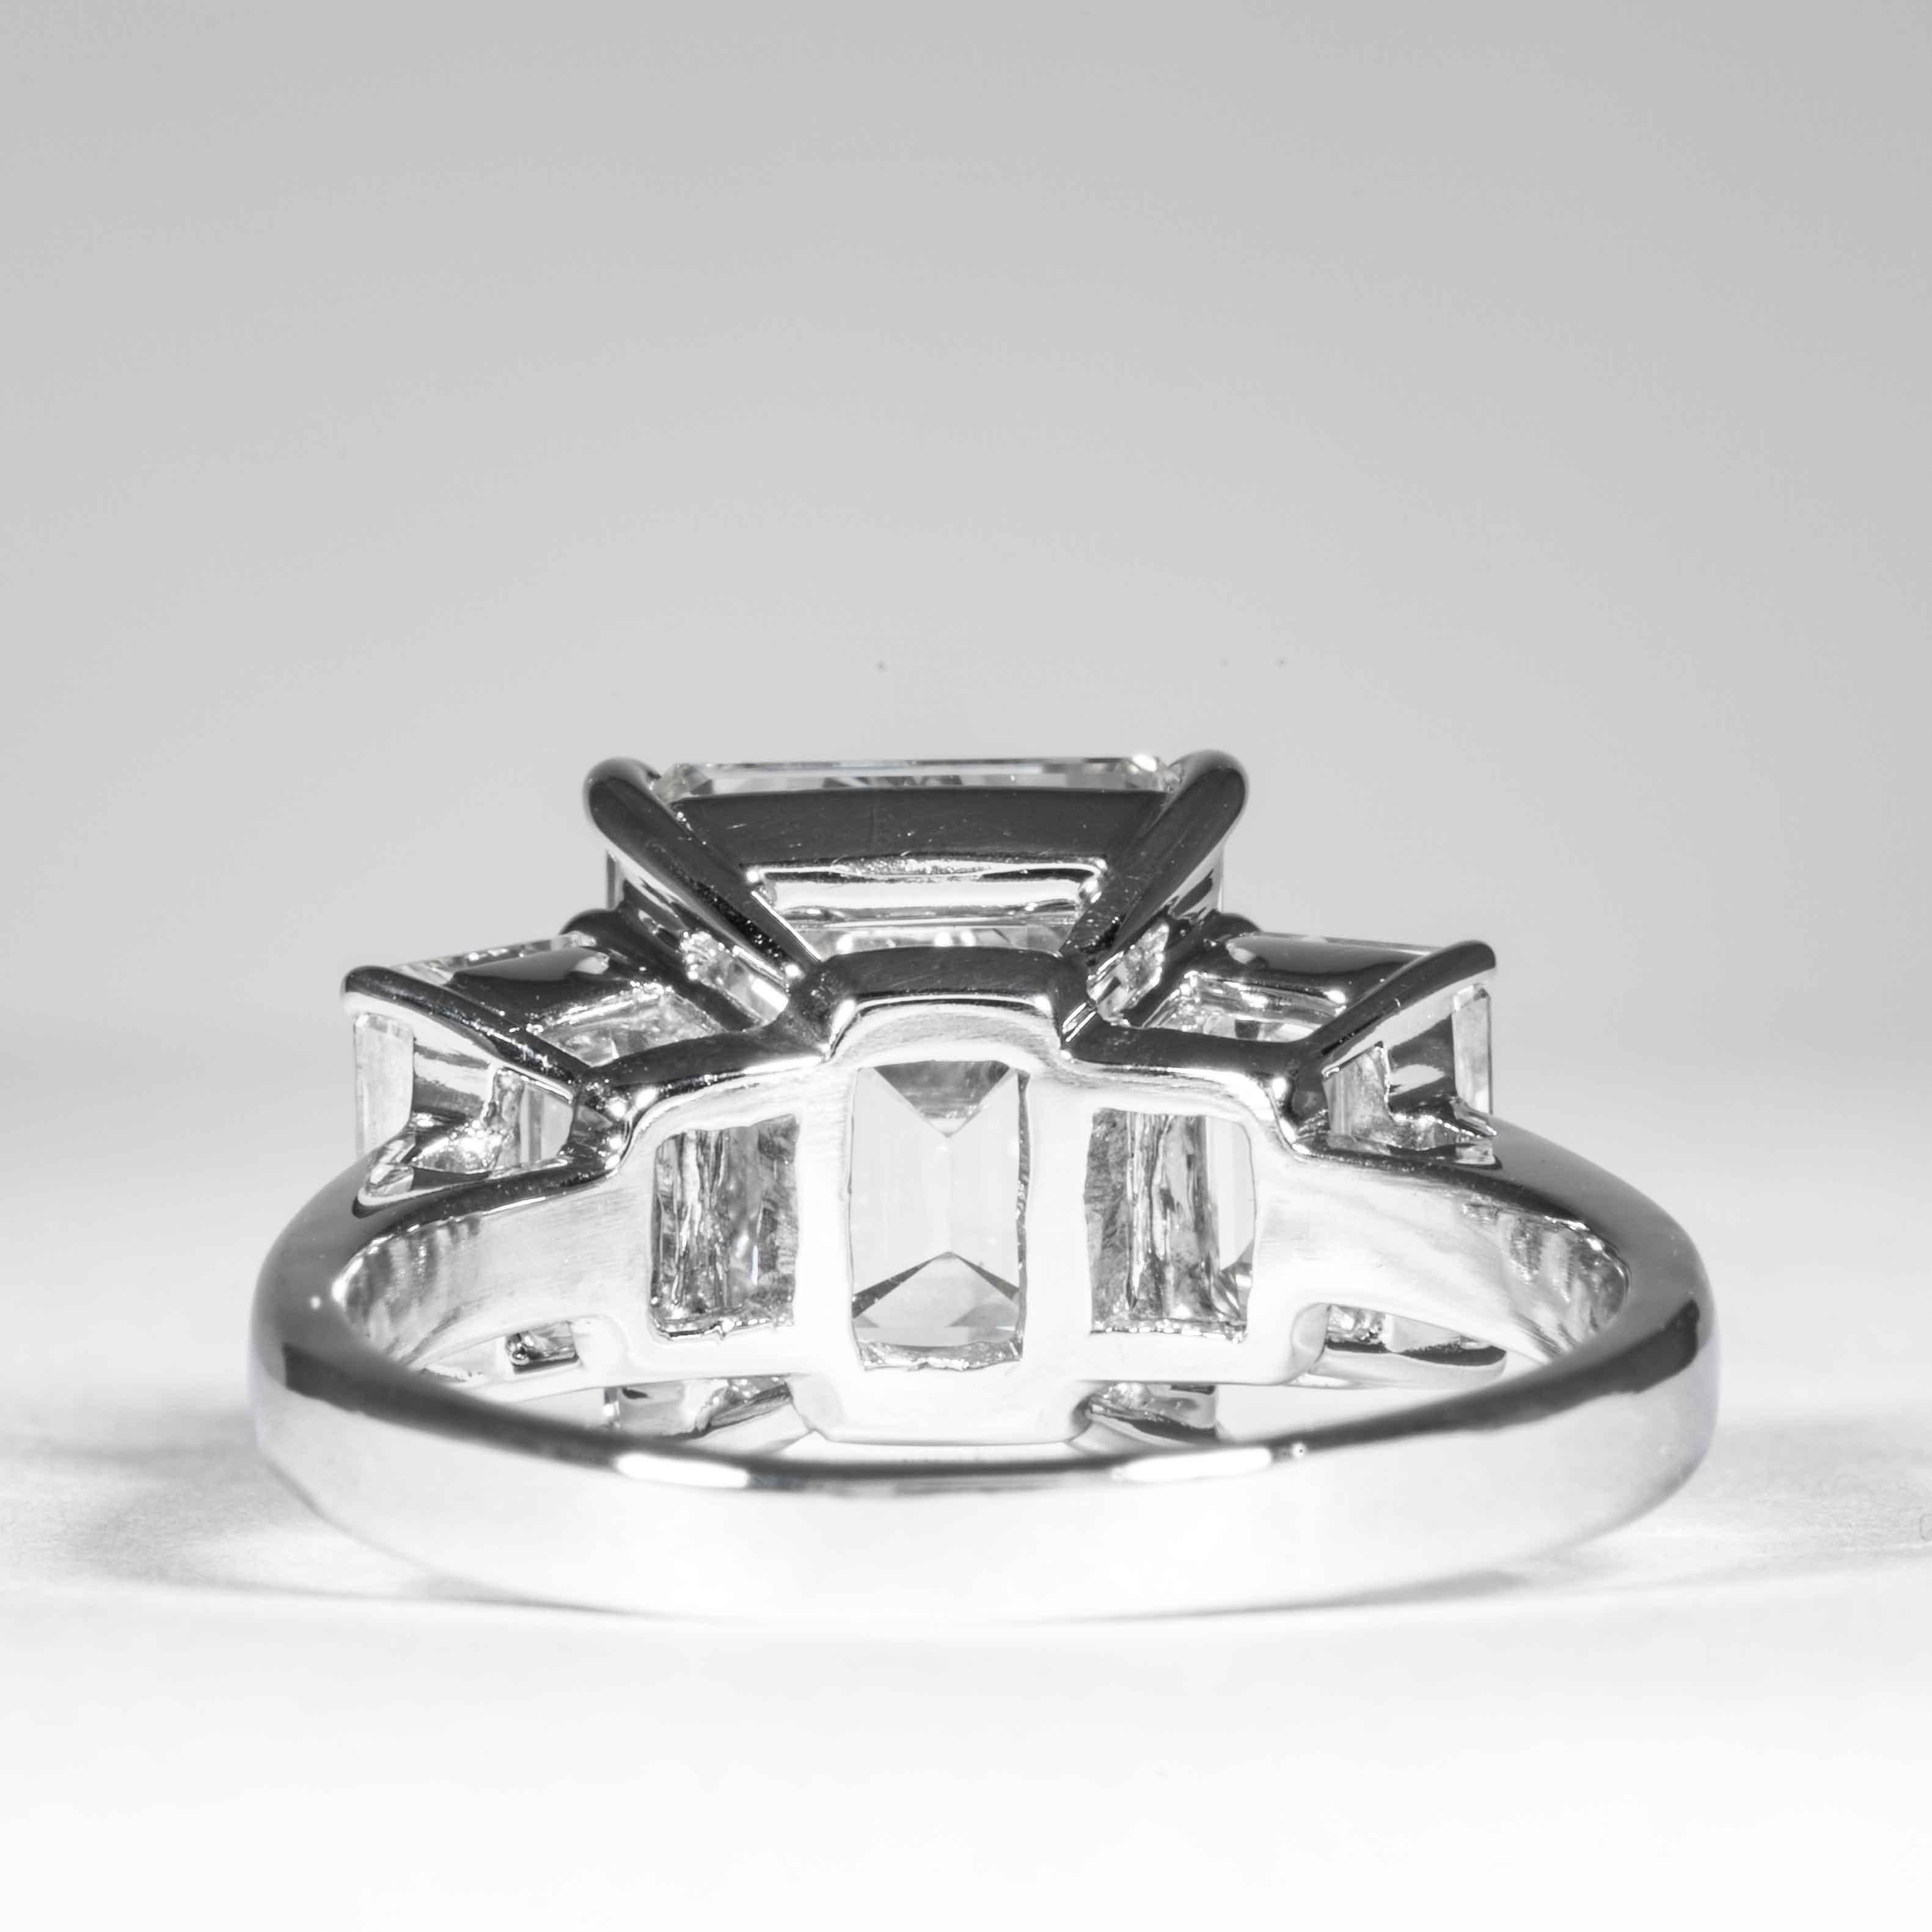 Shreve, Crump & Low GIA Certified 5.05 Carat J VVS2 Emerald Cut Diamond Ring In New Condition For Sale In Boston, MA